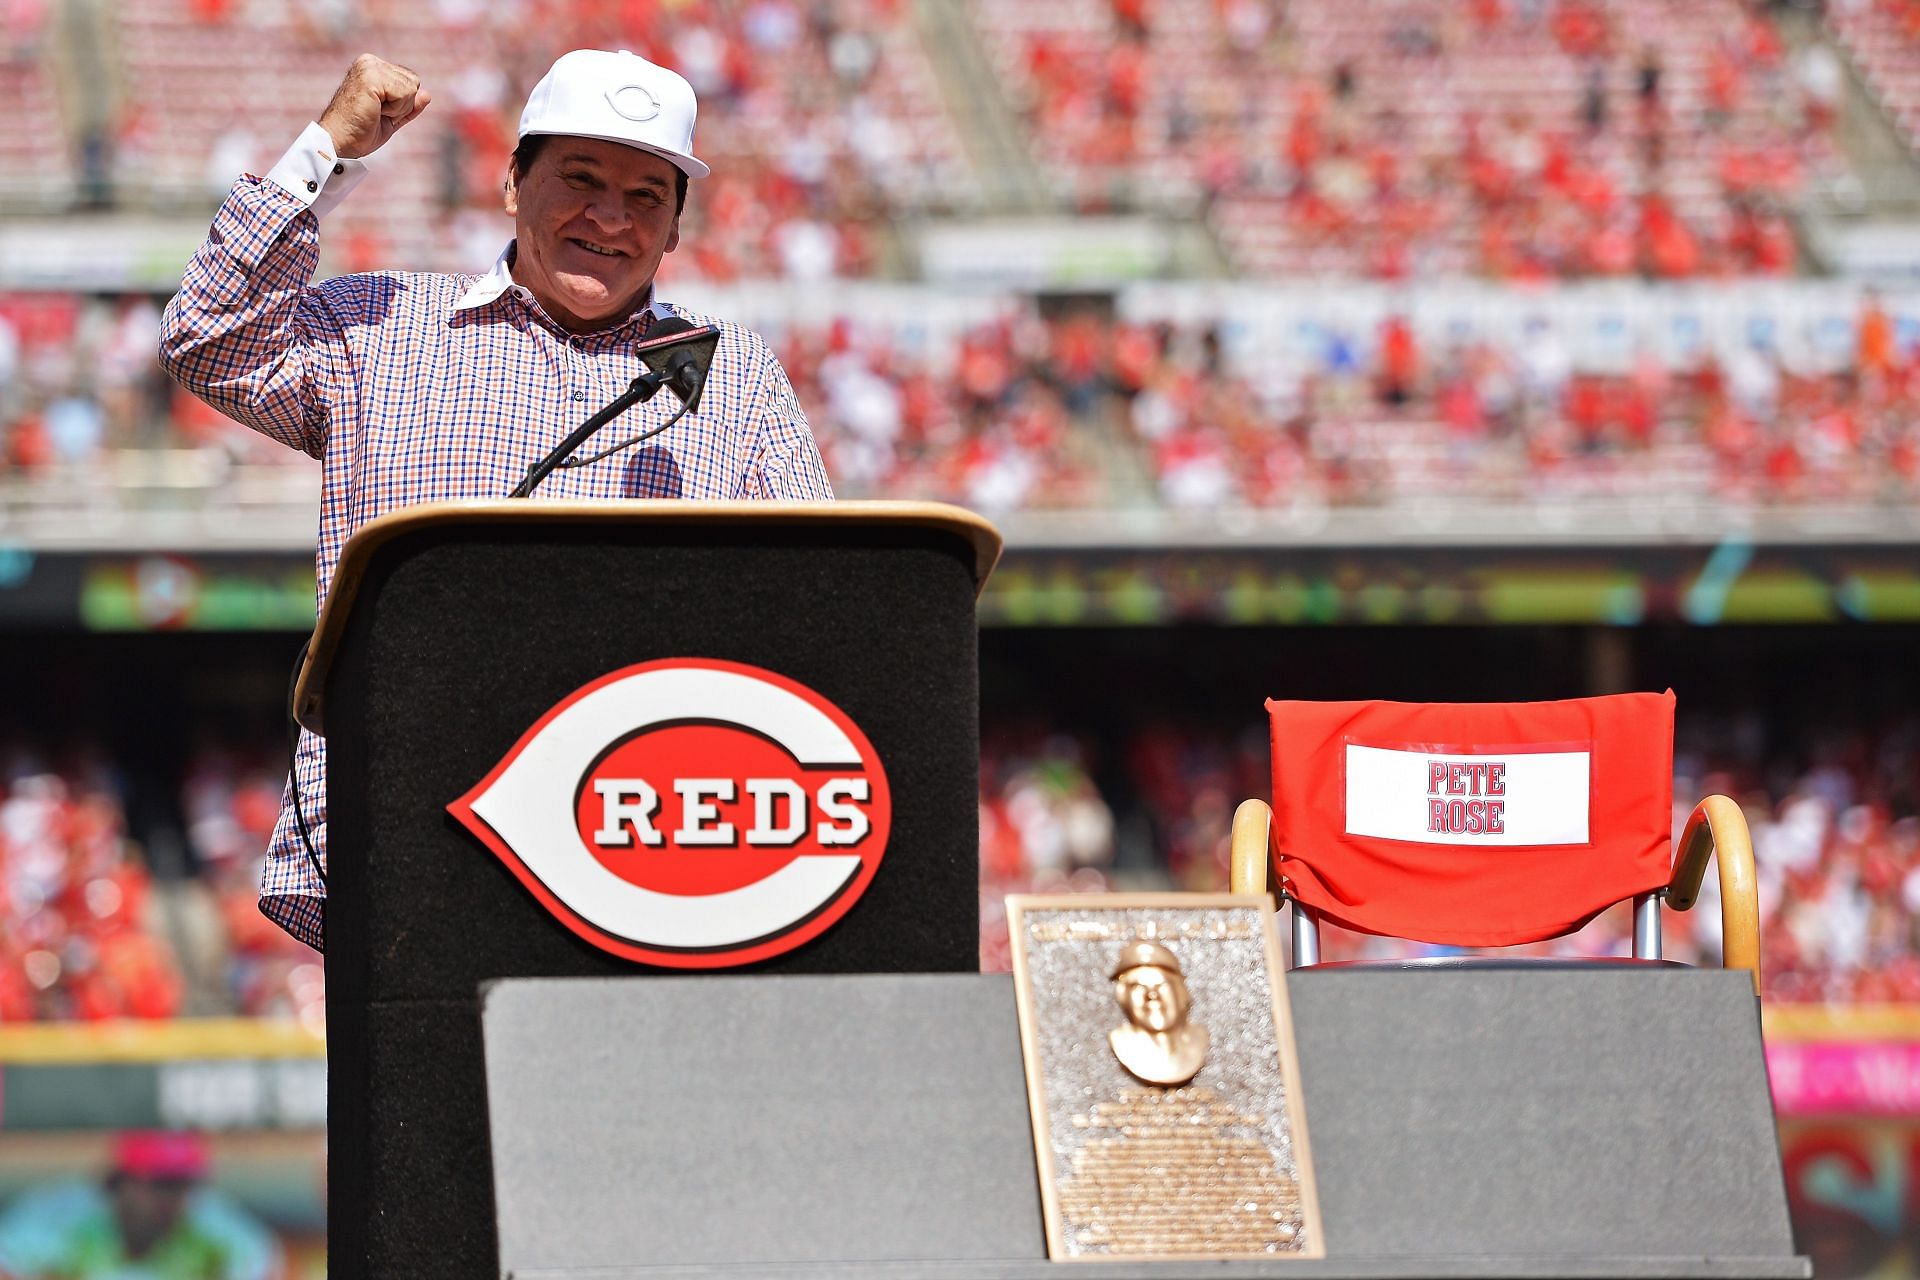 Cincinnati Reds former player Pete Rose has the most hits in MLB history